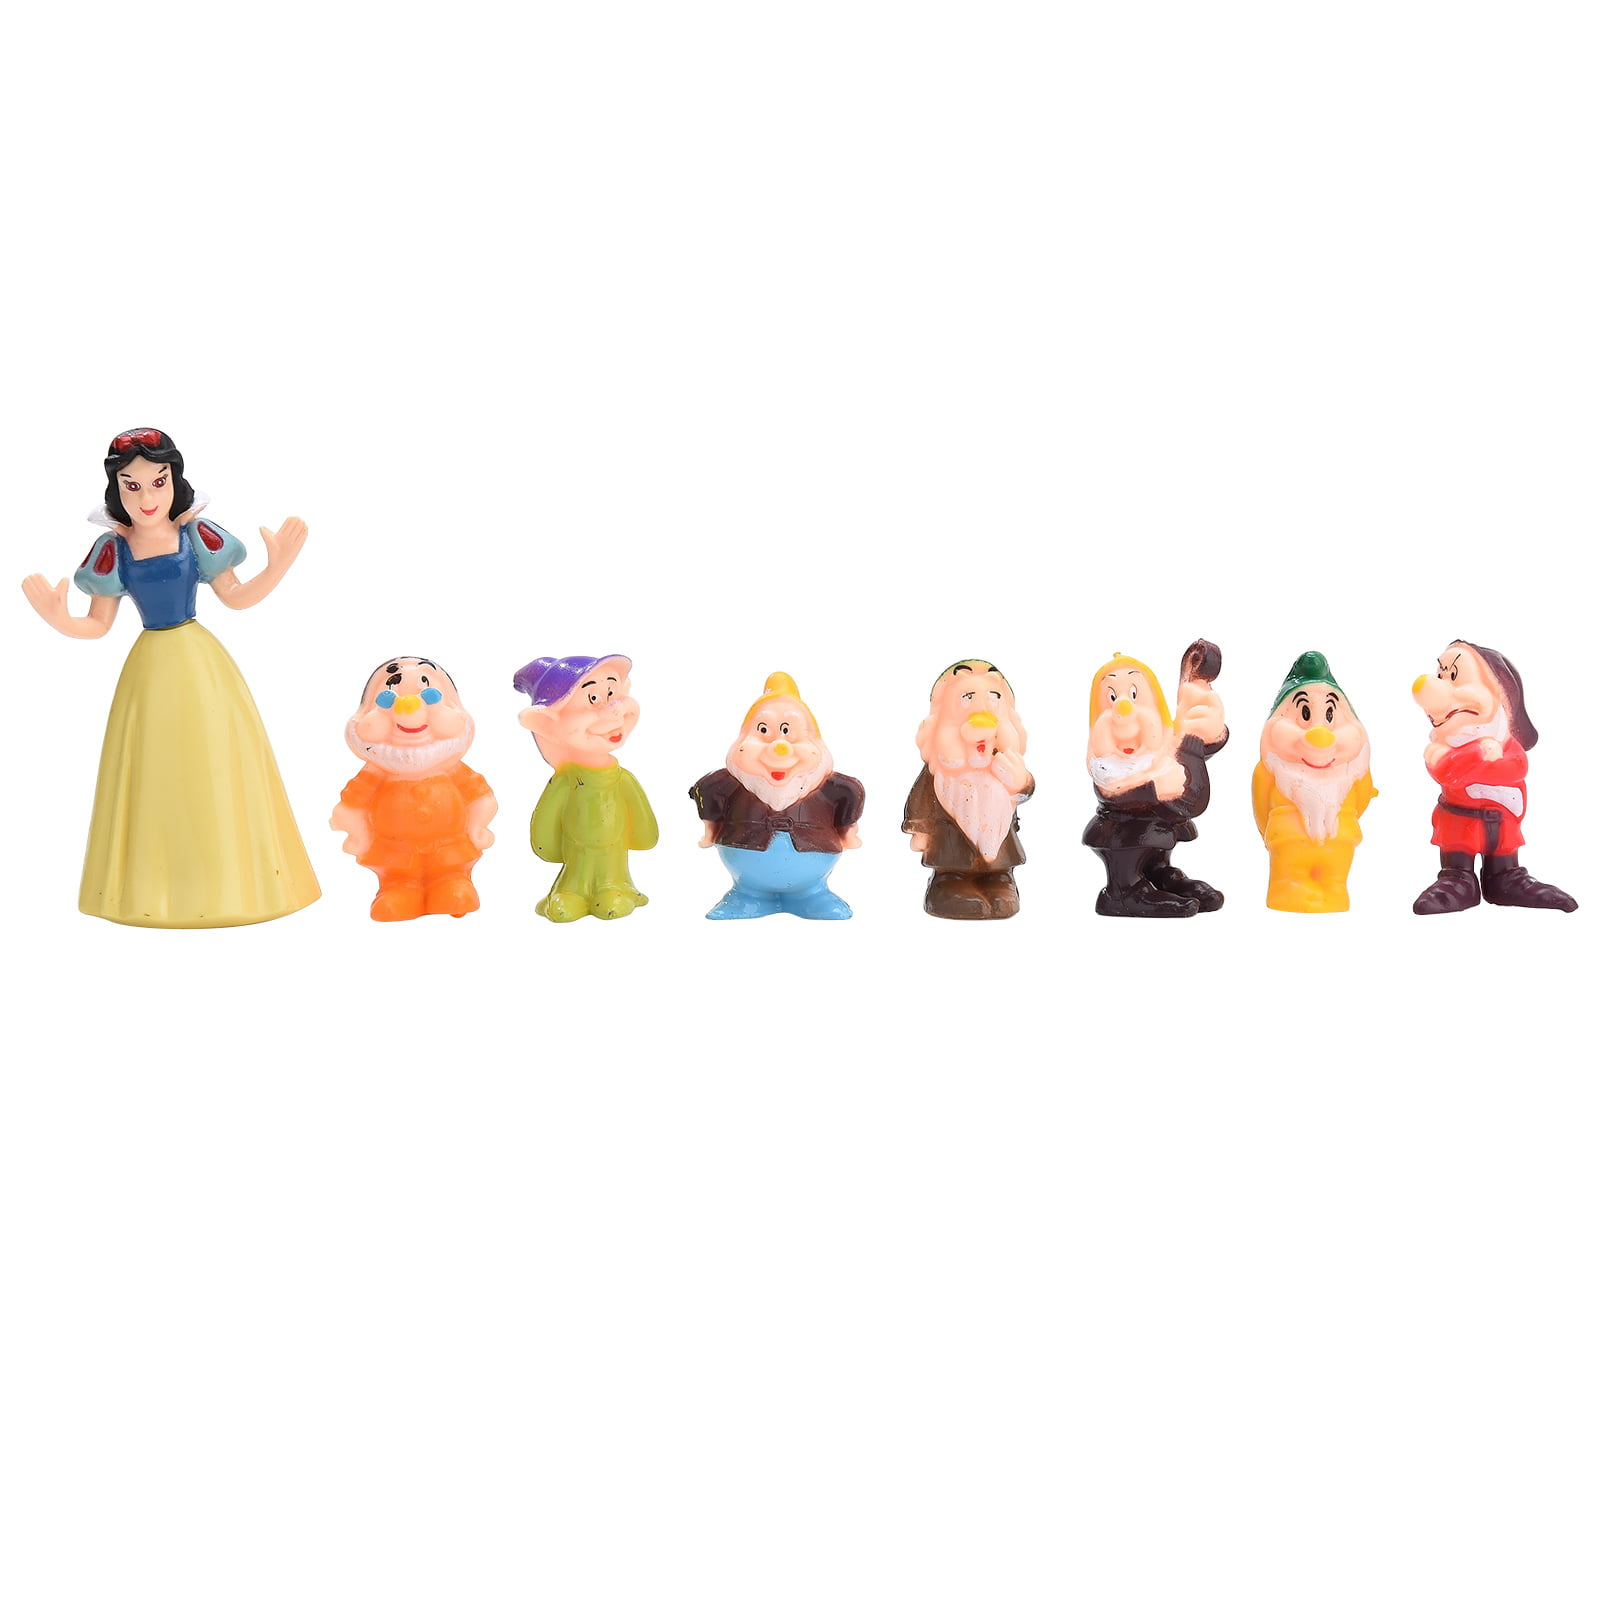 MADE IN USA SNOW WHITE & 7 DWARFS Dollhouse Miniature Picture FAST DELIVERY 